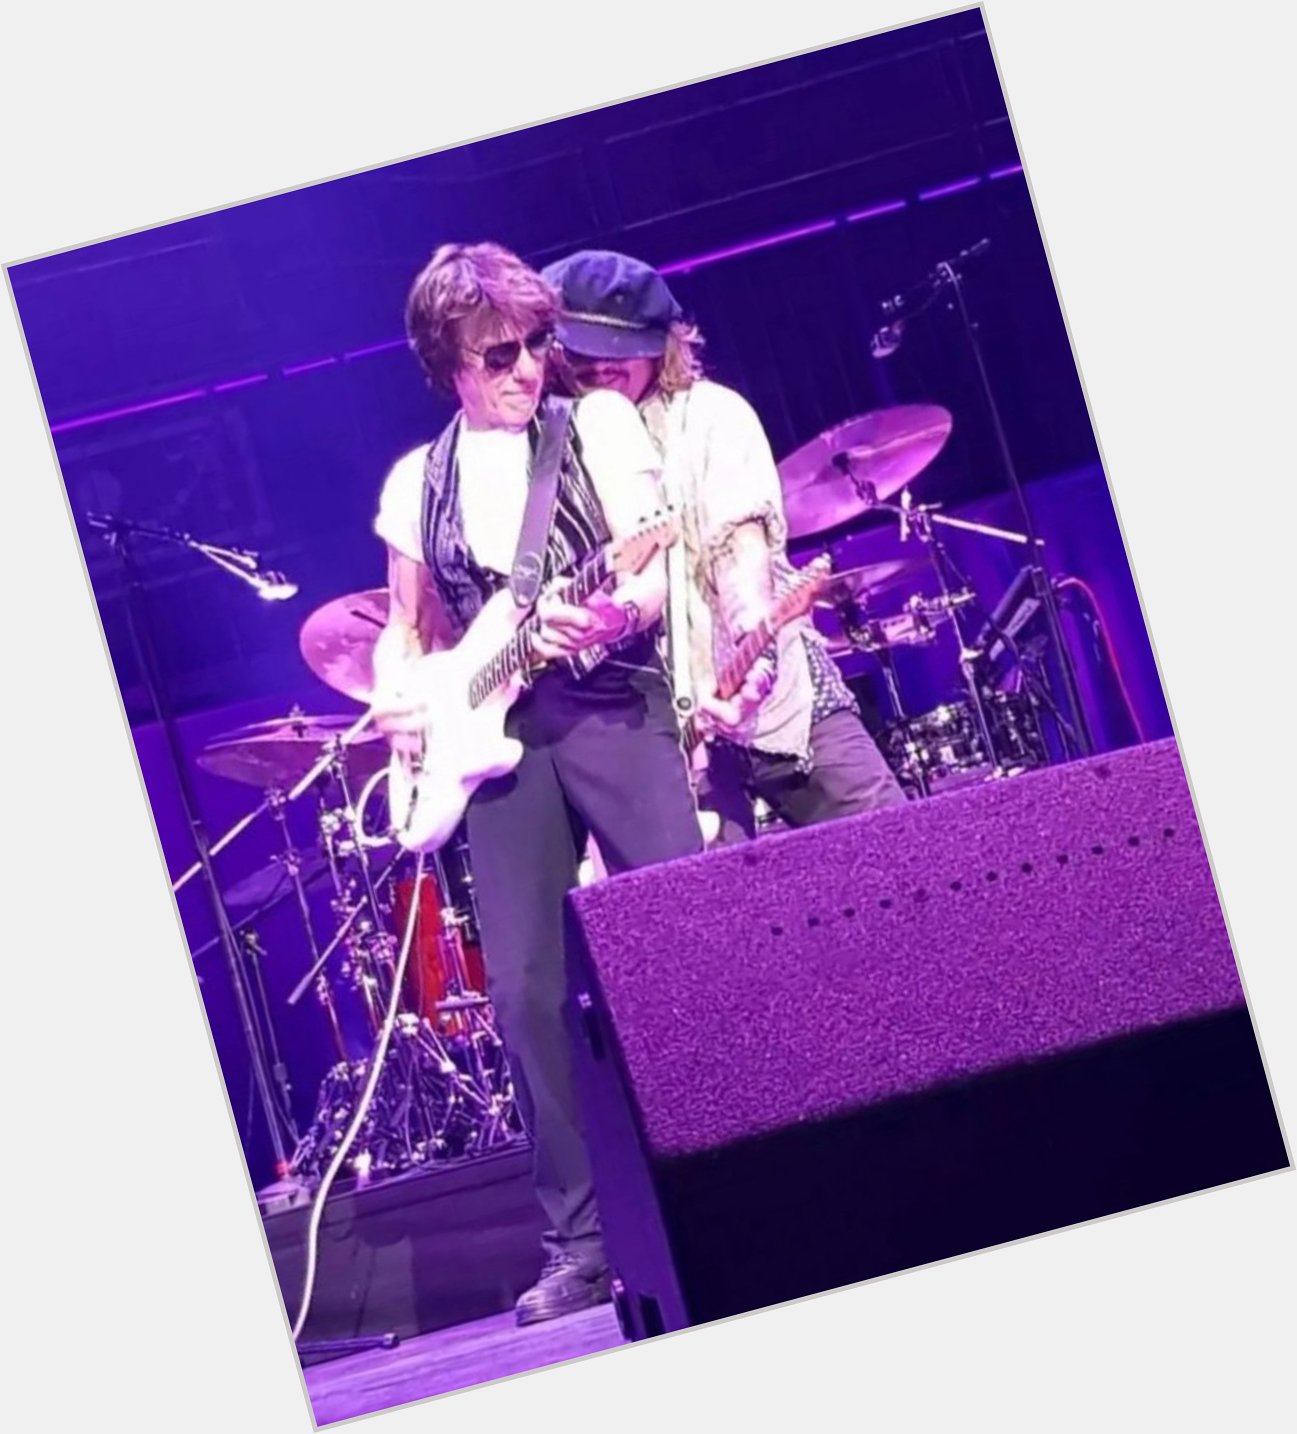 \"Happy Birthday Jeff Beck \"
Rock Out tonight in Oslo with family & friends 

CTO 